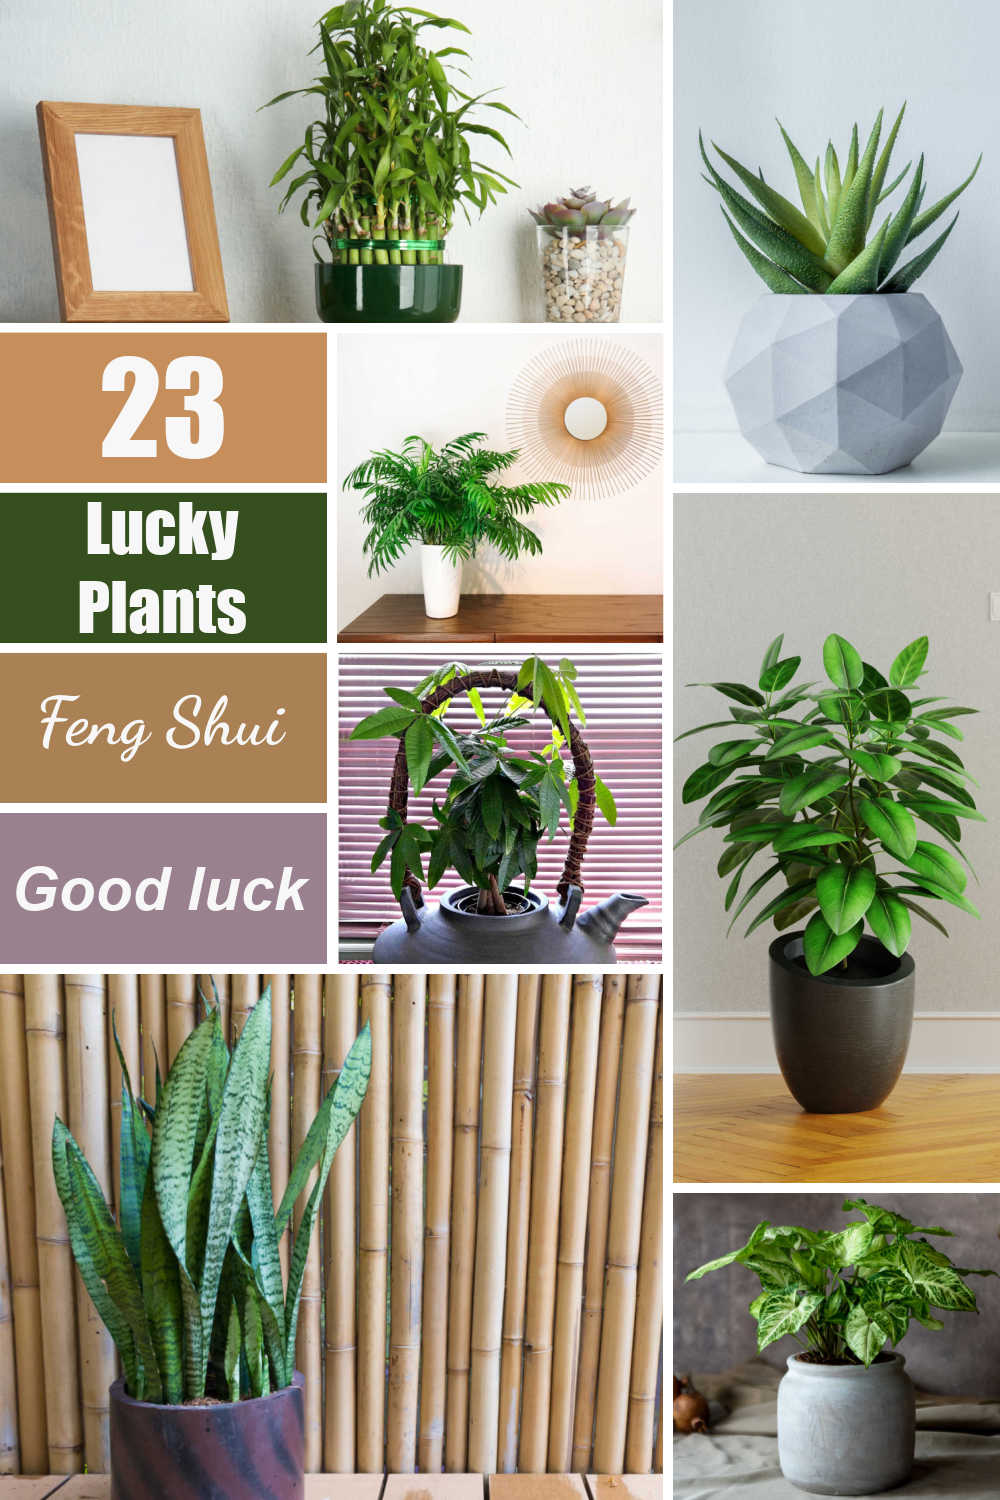 Collection of plants in a collage with words 23 Lucky plants, feng shui, good luck.